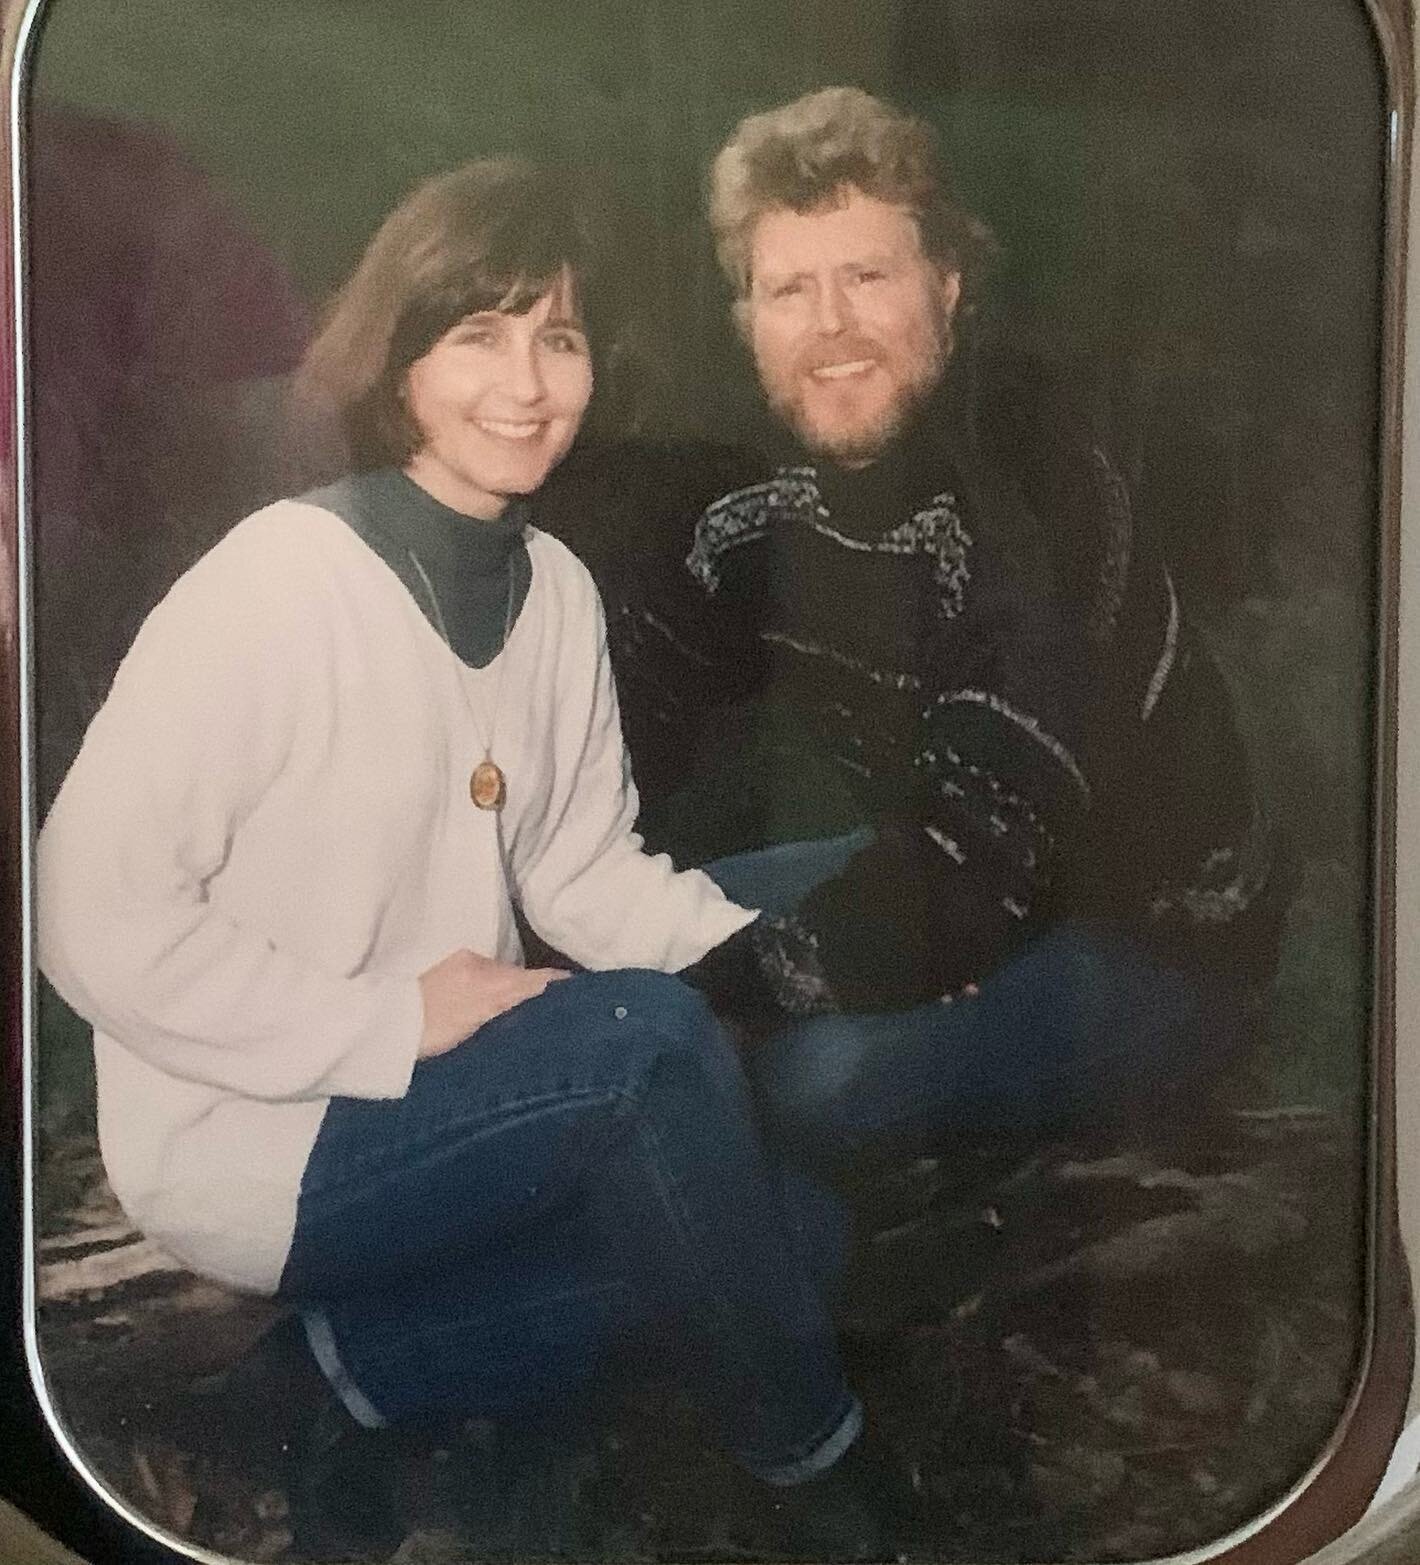 I found this gem on a shelf at my Mom&rsquo;s house. I almost forgot we had taken this picture. I think it may have been some time in the mid-90s.

I decide to post this for no reason other than it made my heart smile today. It&rsquo;s so important t